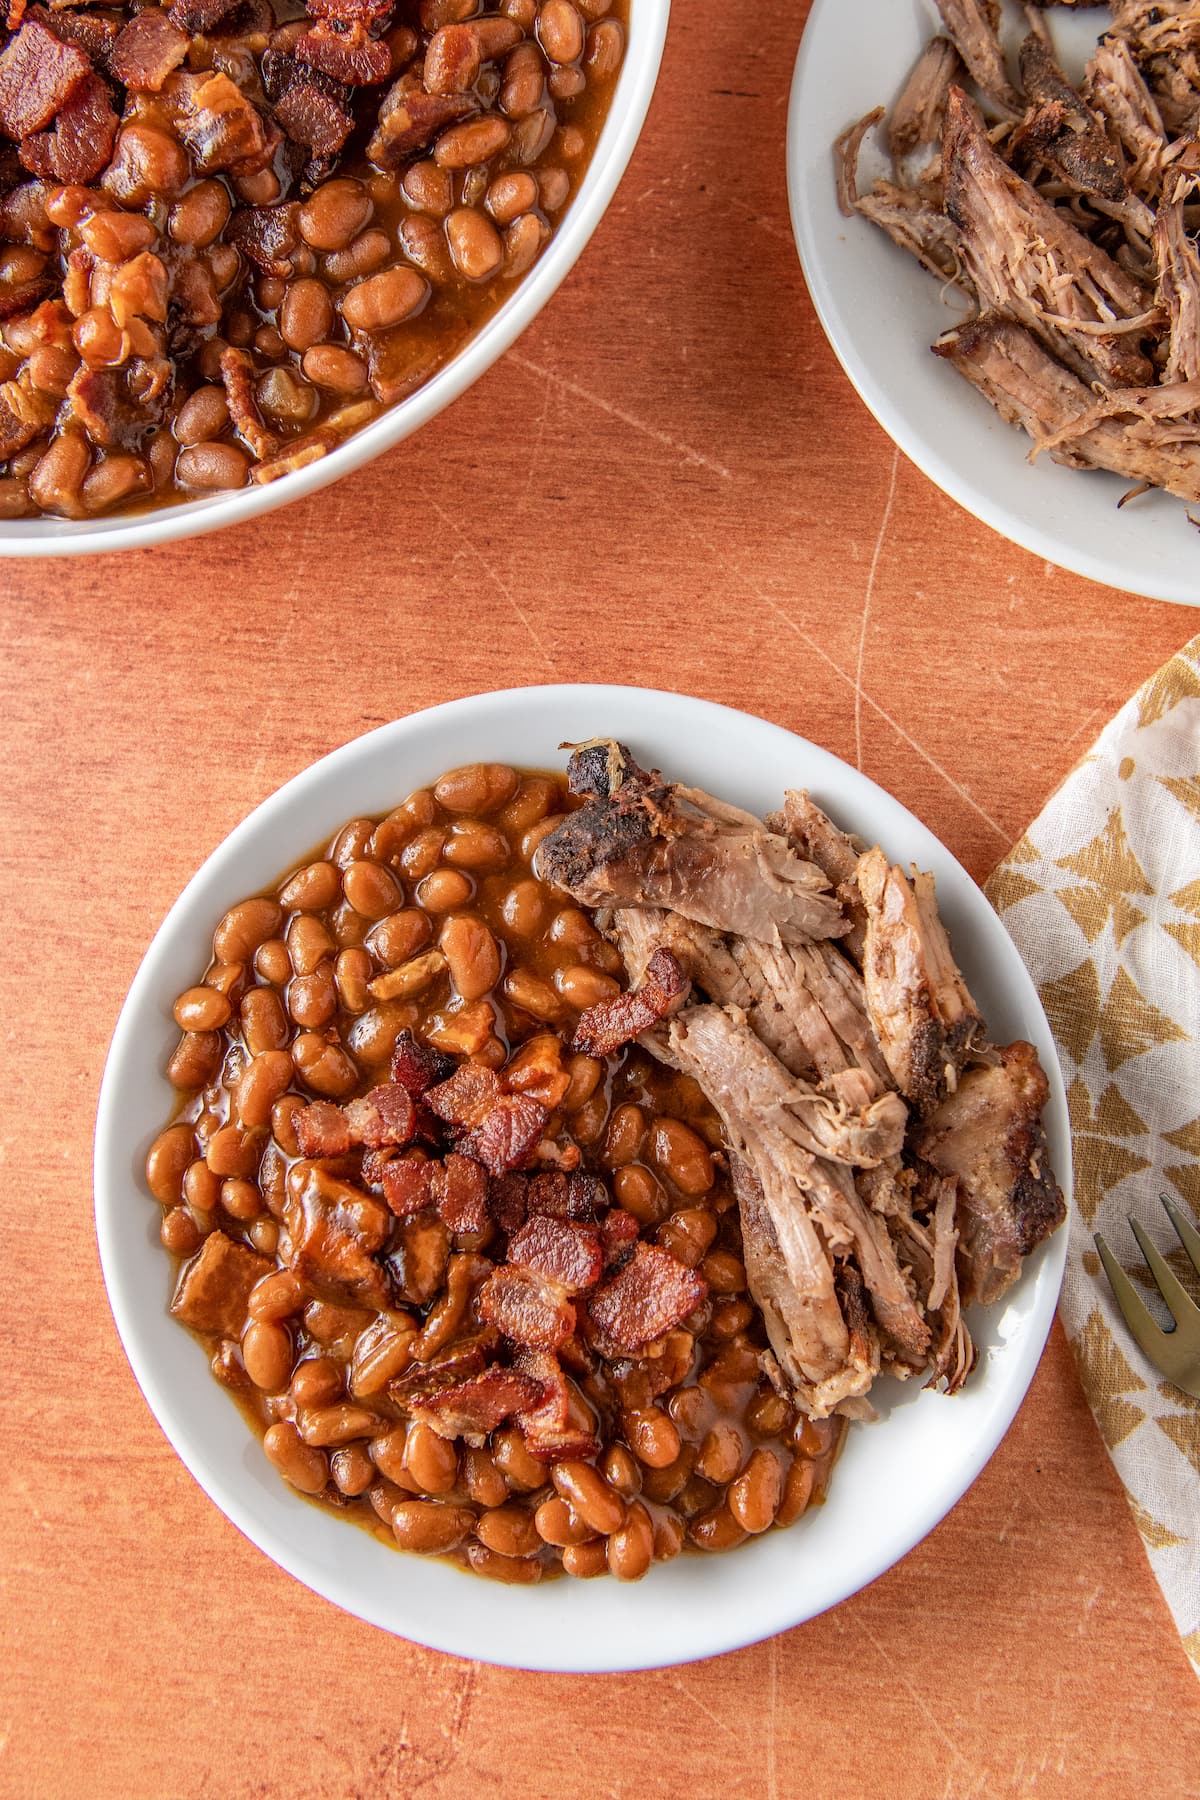 baked beans in a bowl with pulled pork on the side